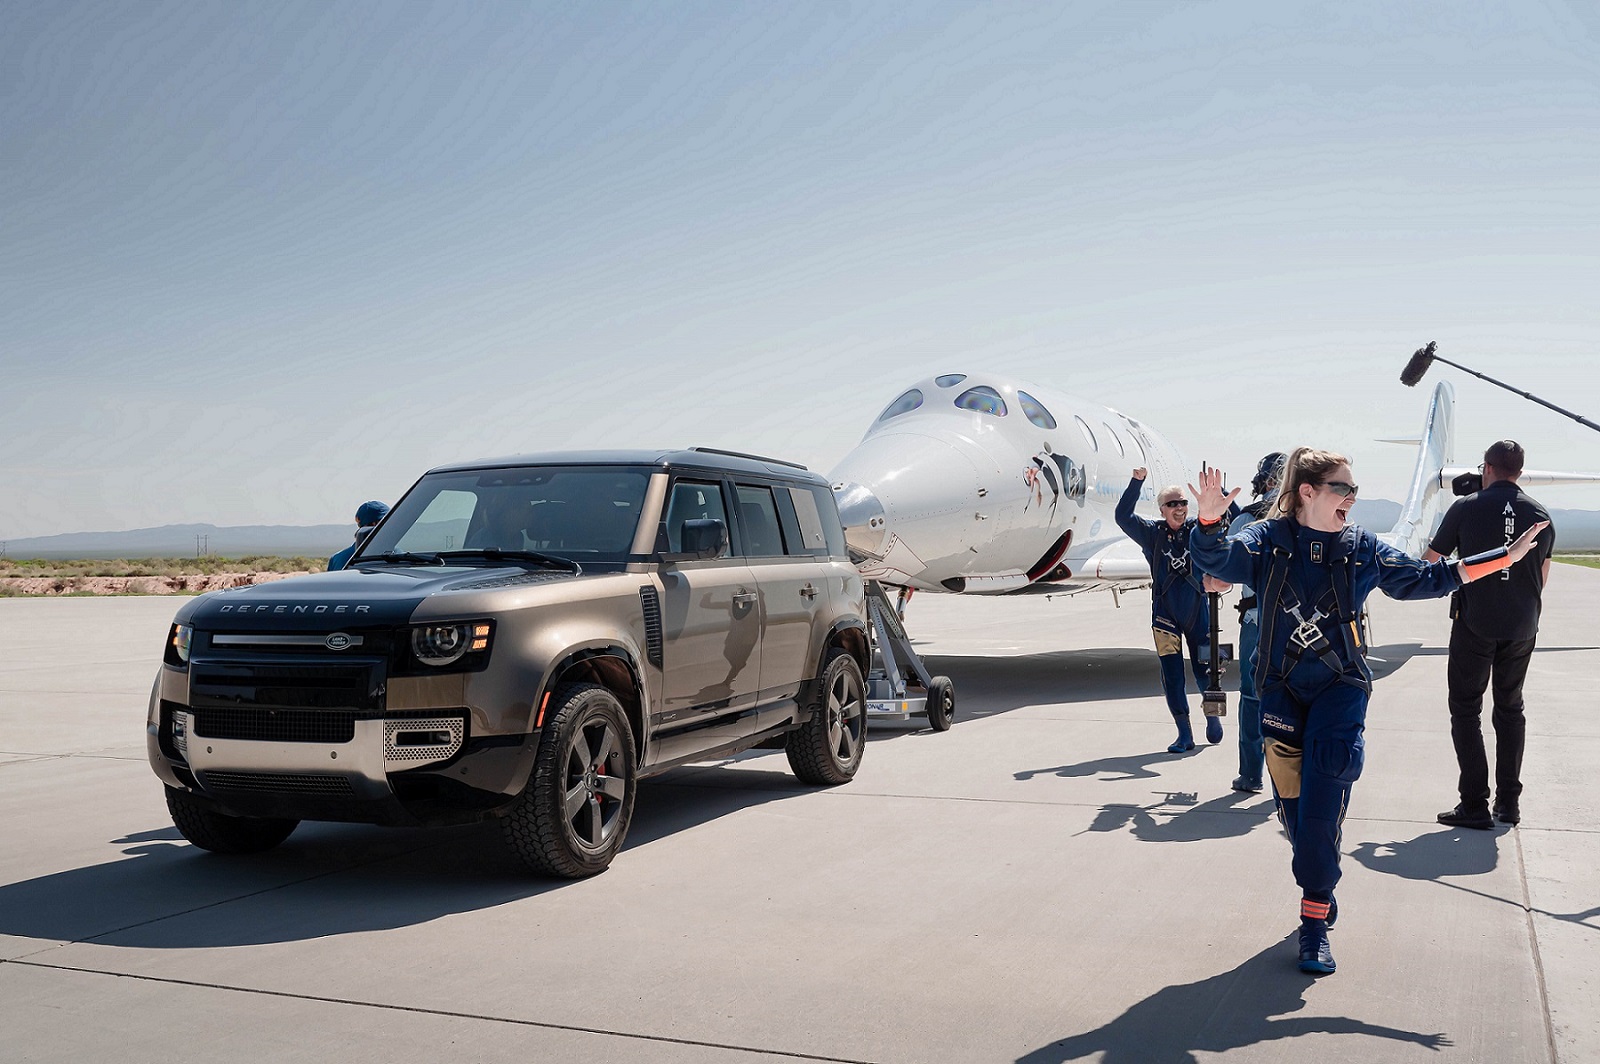 land rover supports virgin galactic’s first fully crewed space flight